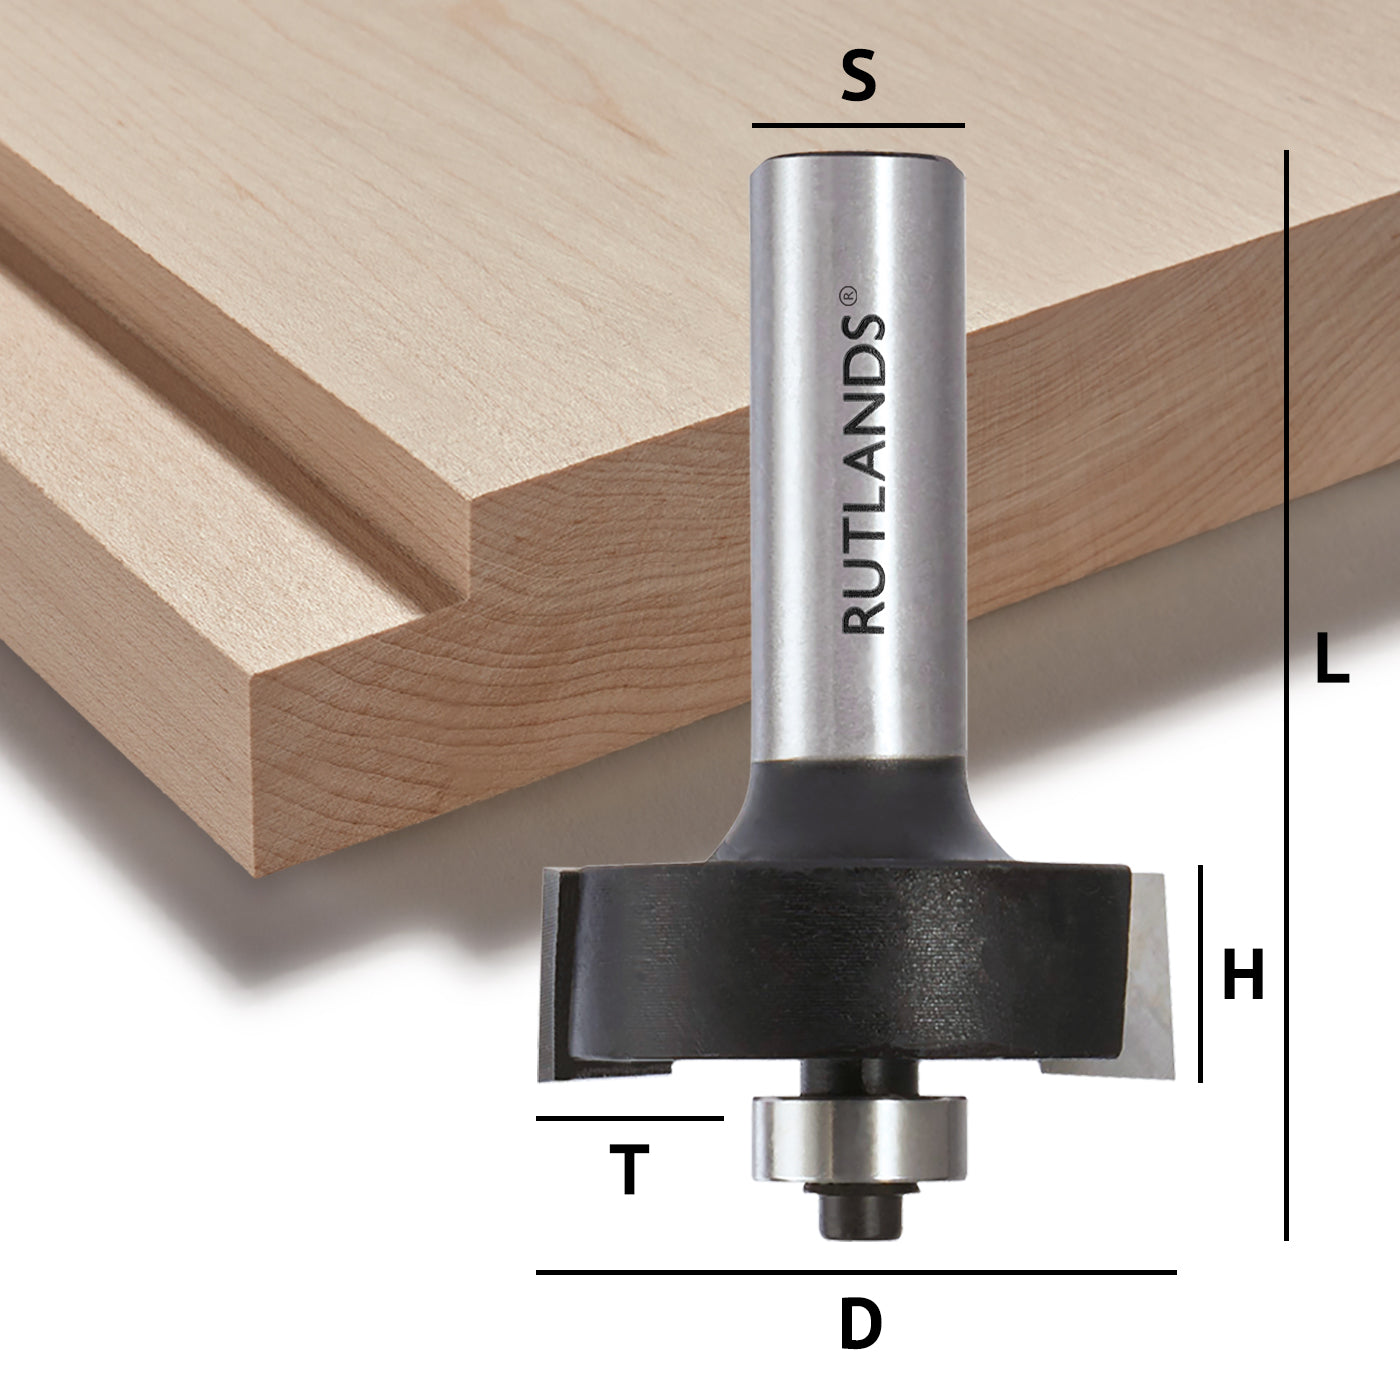 Router Bit - Rabbeting - D=50mm H=20mm T=0 to 20mm L=75mm S=1/2"